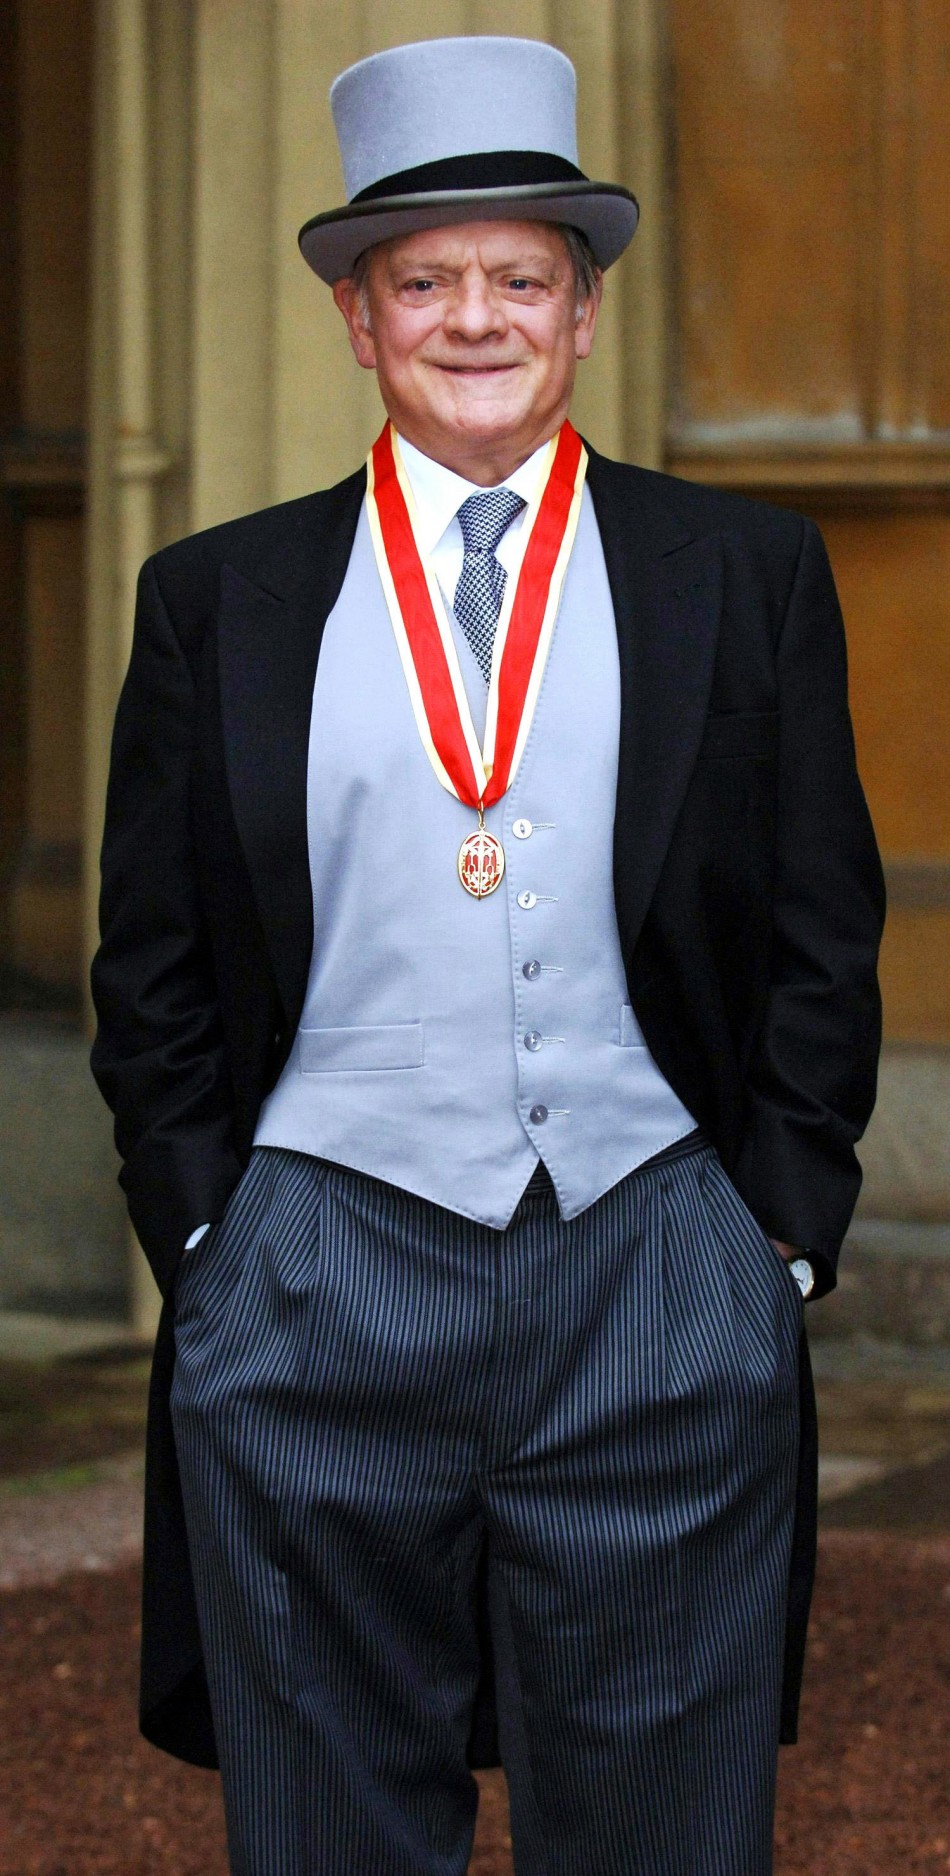 British actor David Jason stands after collecting his knighthood from Britains Queen Elizabeth II during an investiture ceremony at Buckingham Palace in central London December 1, 2005. Sir David, as he will be known, is the popular star of television